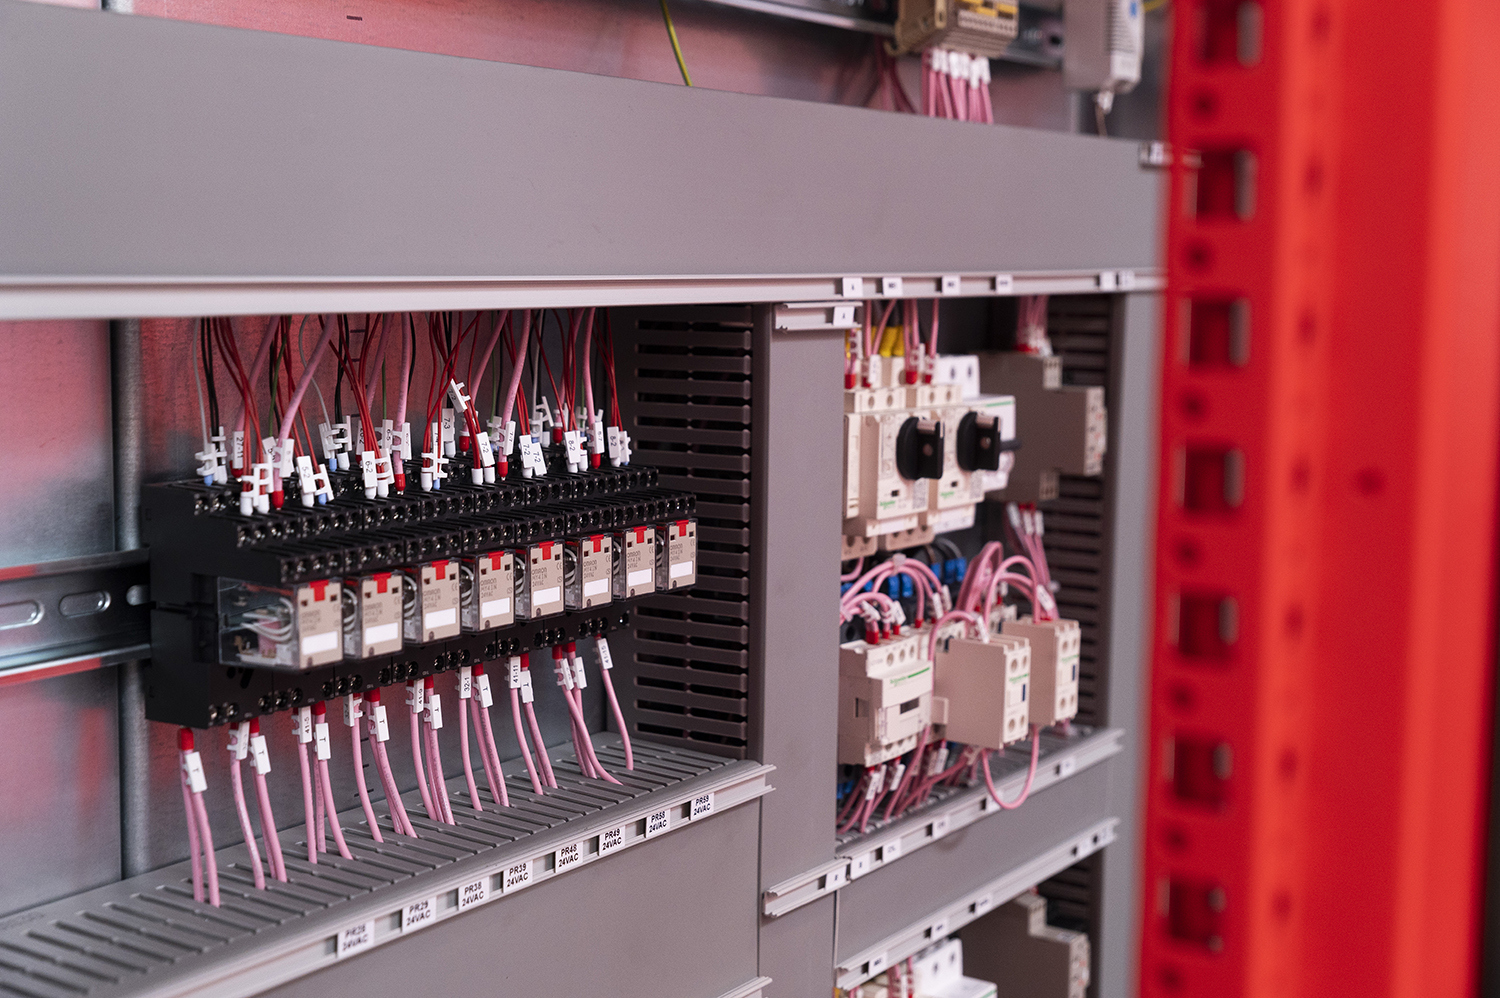 What Are The Key Components Of Industrial Control Panels?